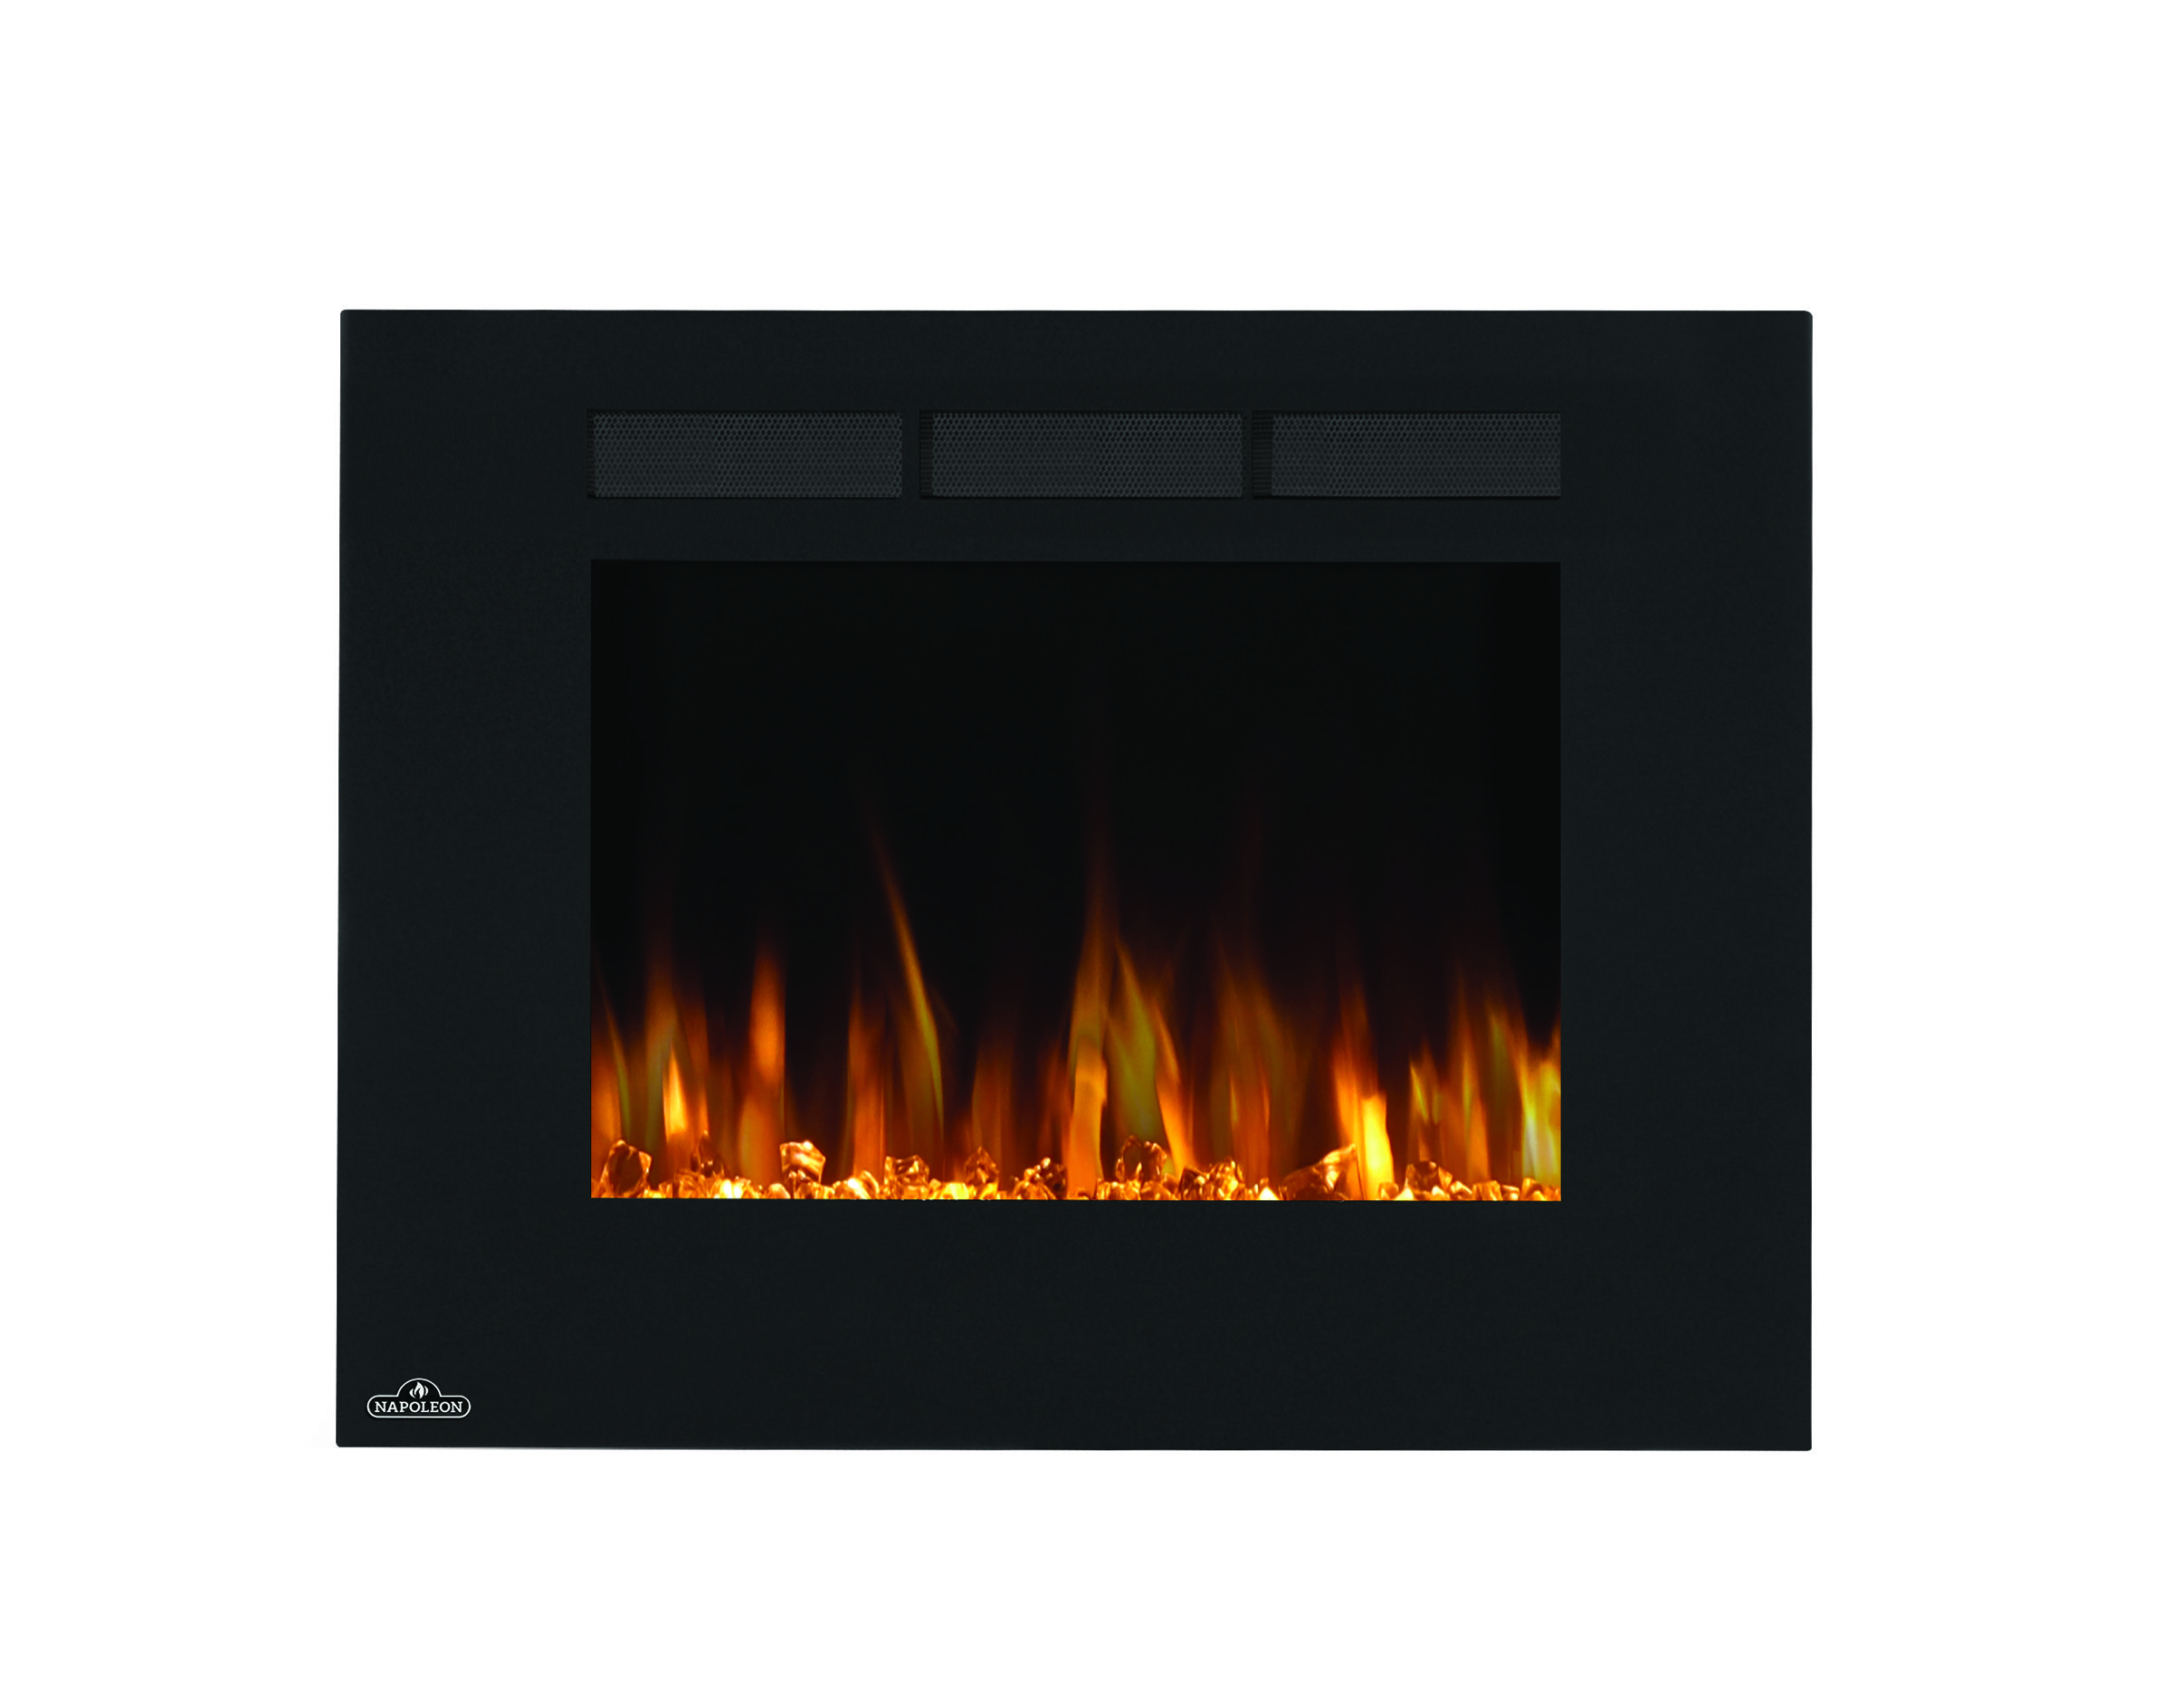 Fire and Ice Fireplace Lovely Electric Fireplace Wall Mounted Led Fire and Ice Flame